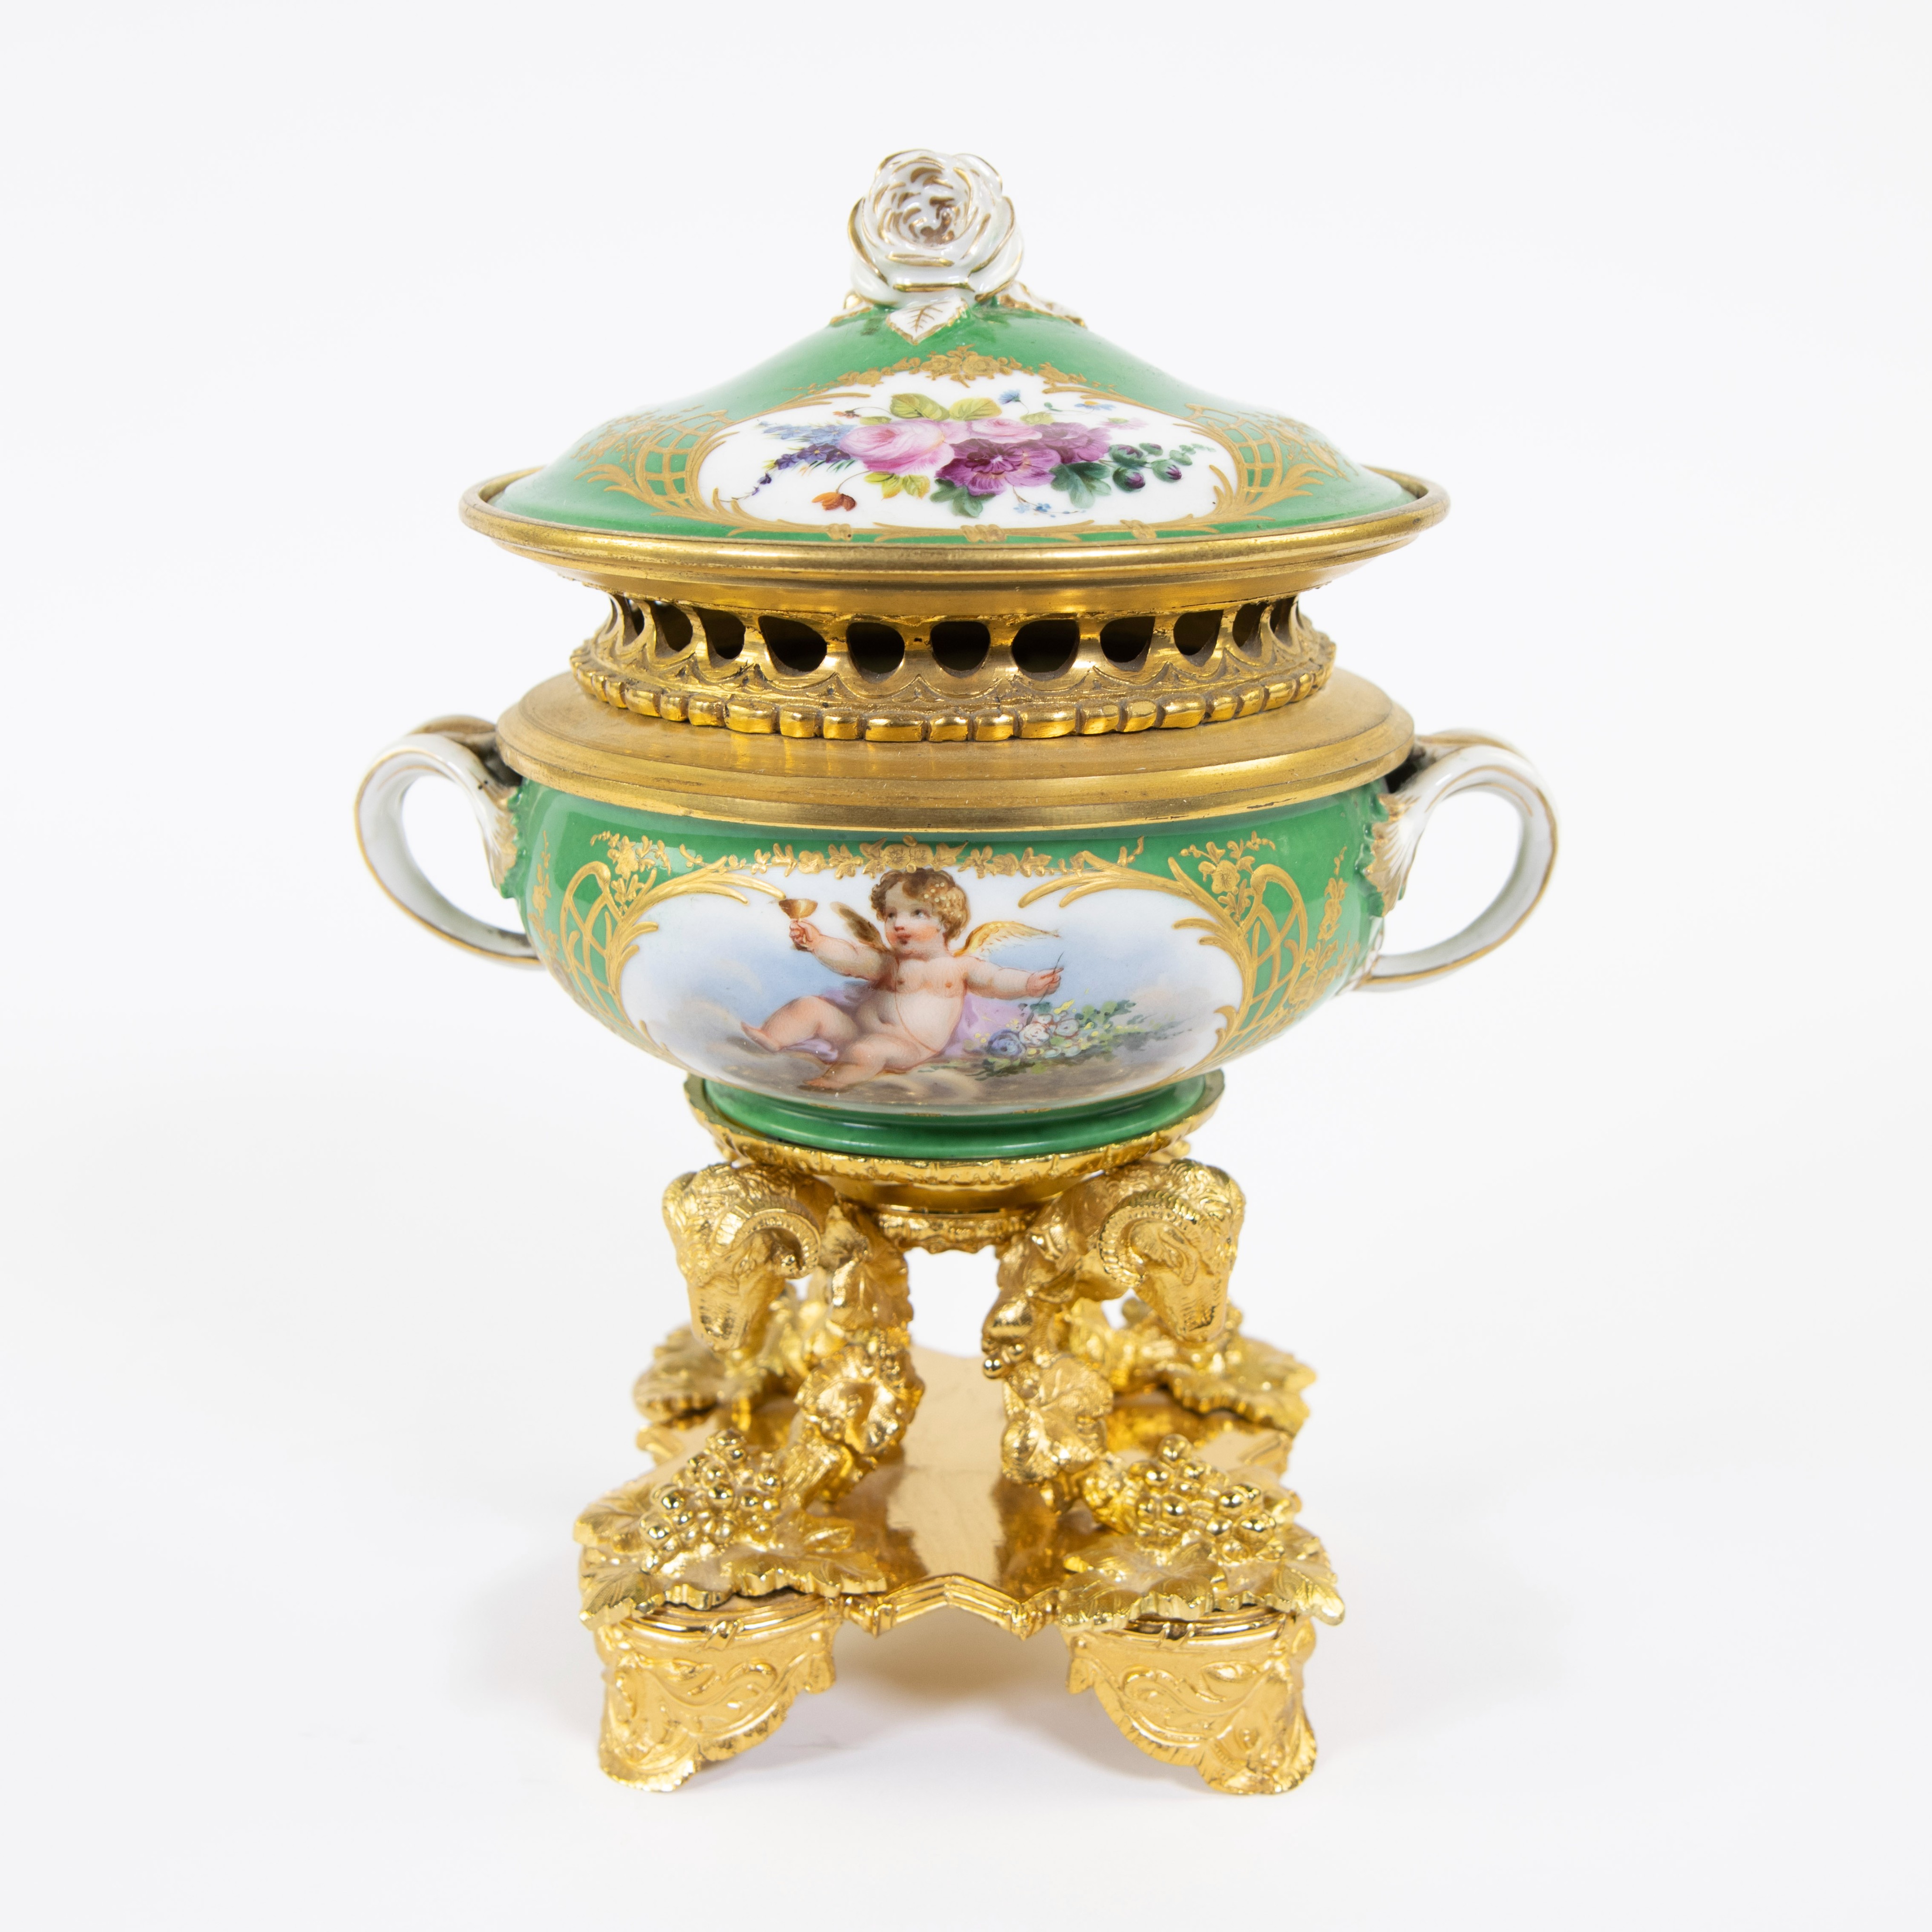 Porcelain table piece with gilt bronze fittings of rams' heads and bunches of grapes. Handpainted wi